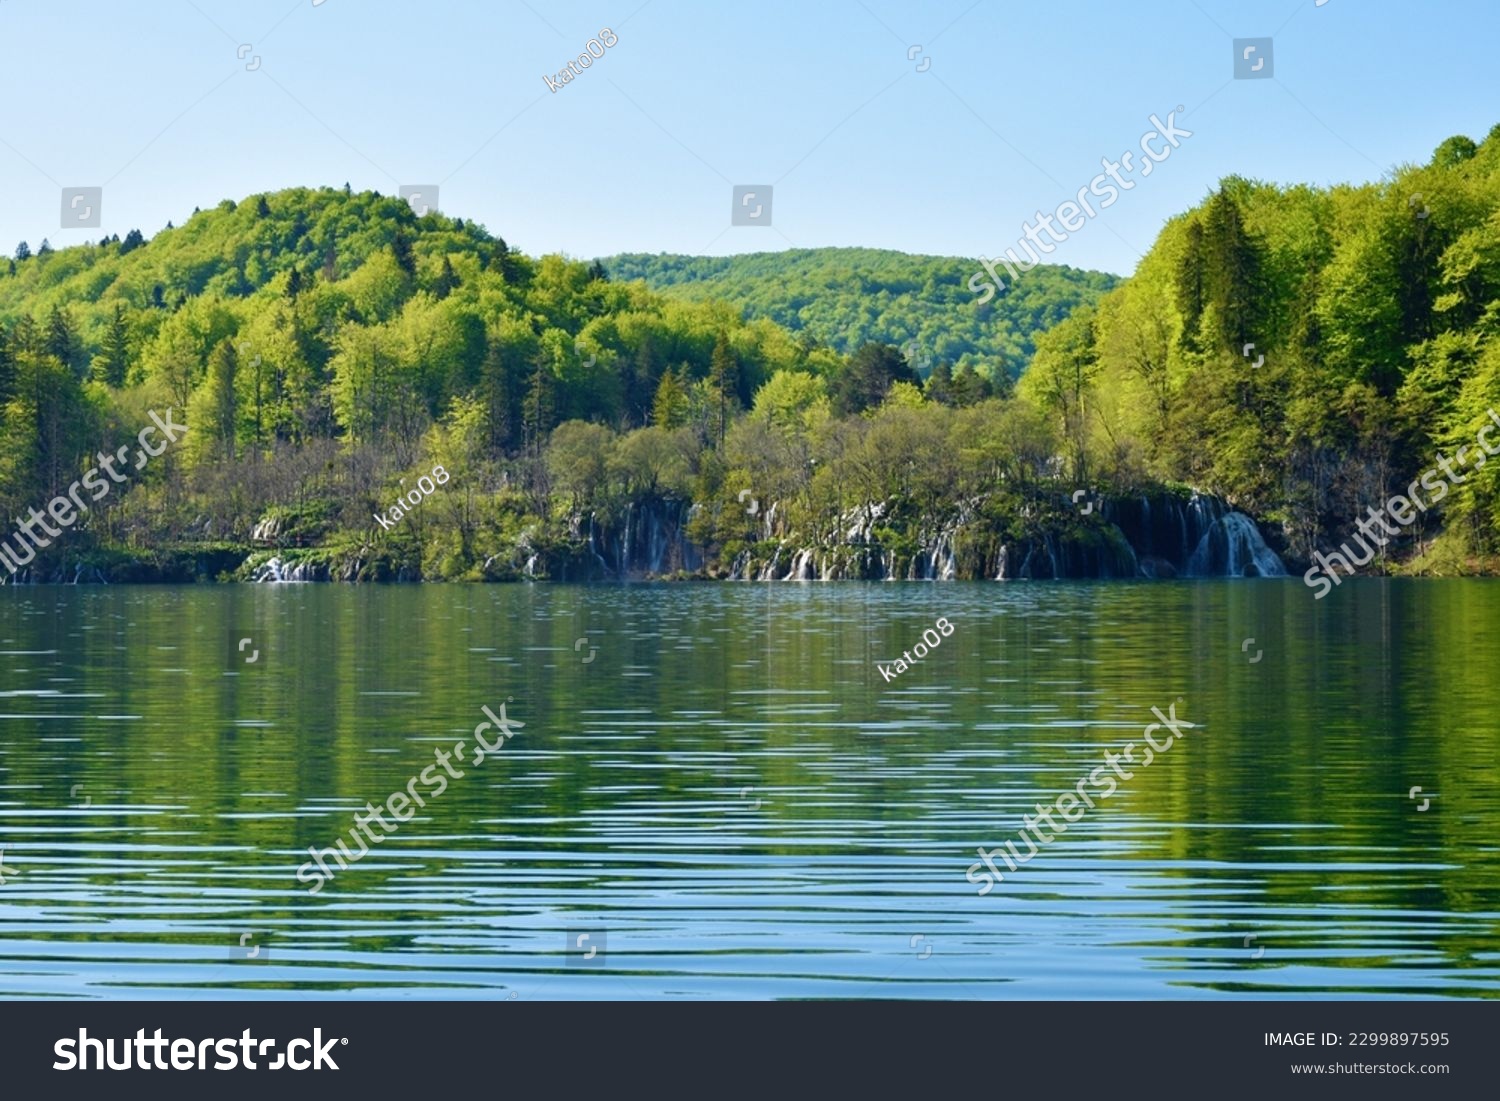 Waterfalls flowing into Kozjak lake at Plitvice lakes in Lika-Senj county, Croatia with forest covered hills above #2299897595